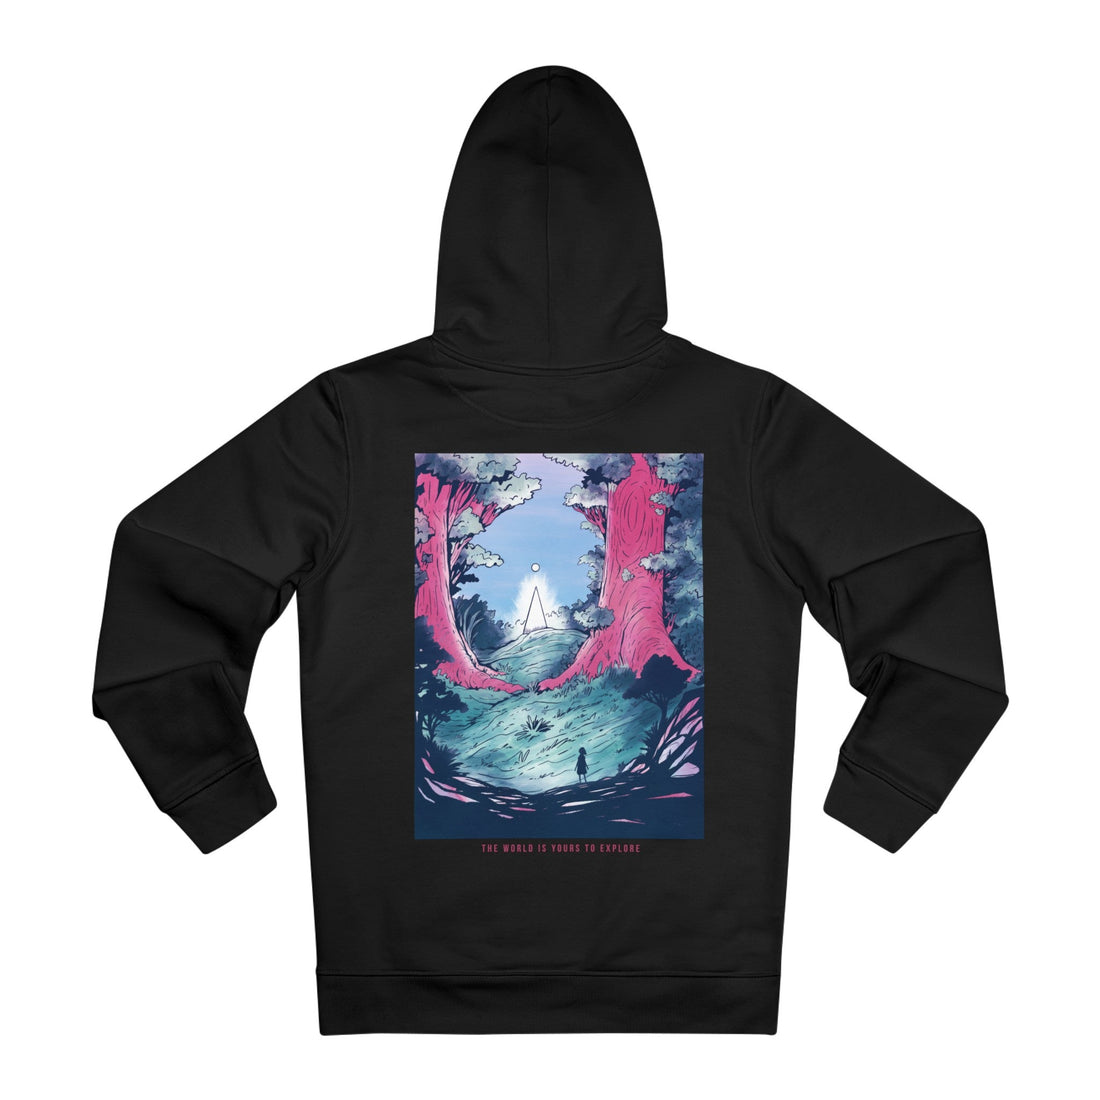 Printify Hoodie Black / M The World is yours to explore - Watercolor Fantasy - Hoodie - Back Design